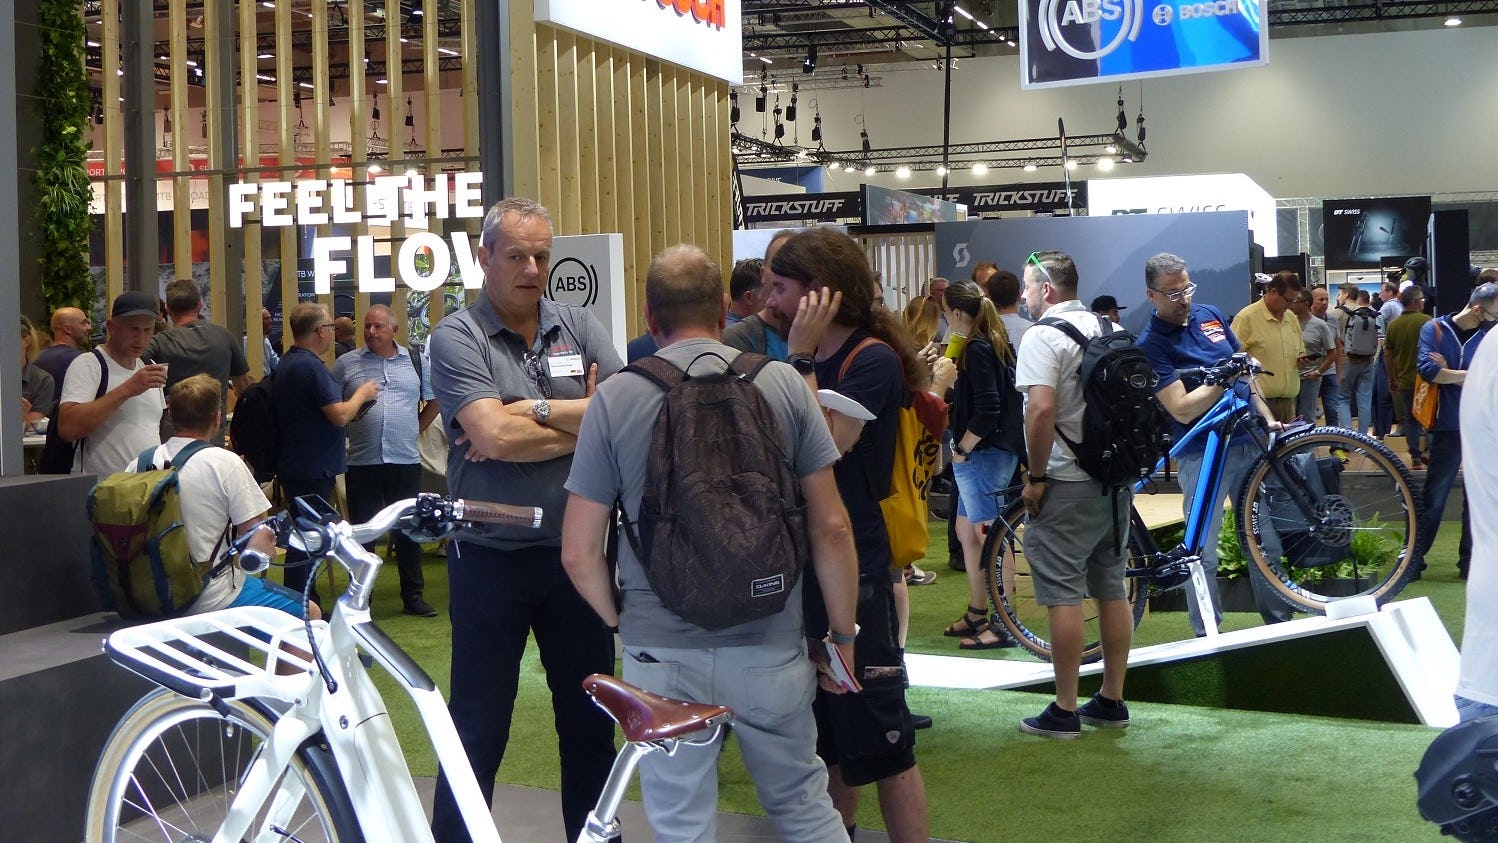 A first sign of success for Eurobike’s new show concept were the large crowds at the opening day of the show. – Photo Bike Europe